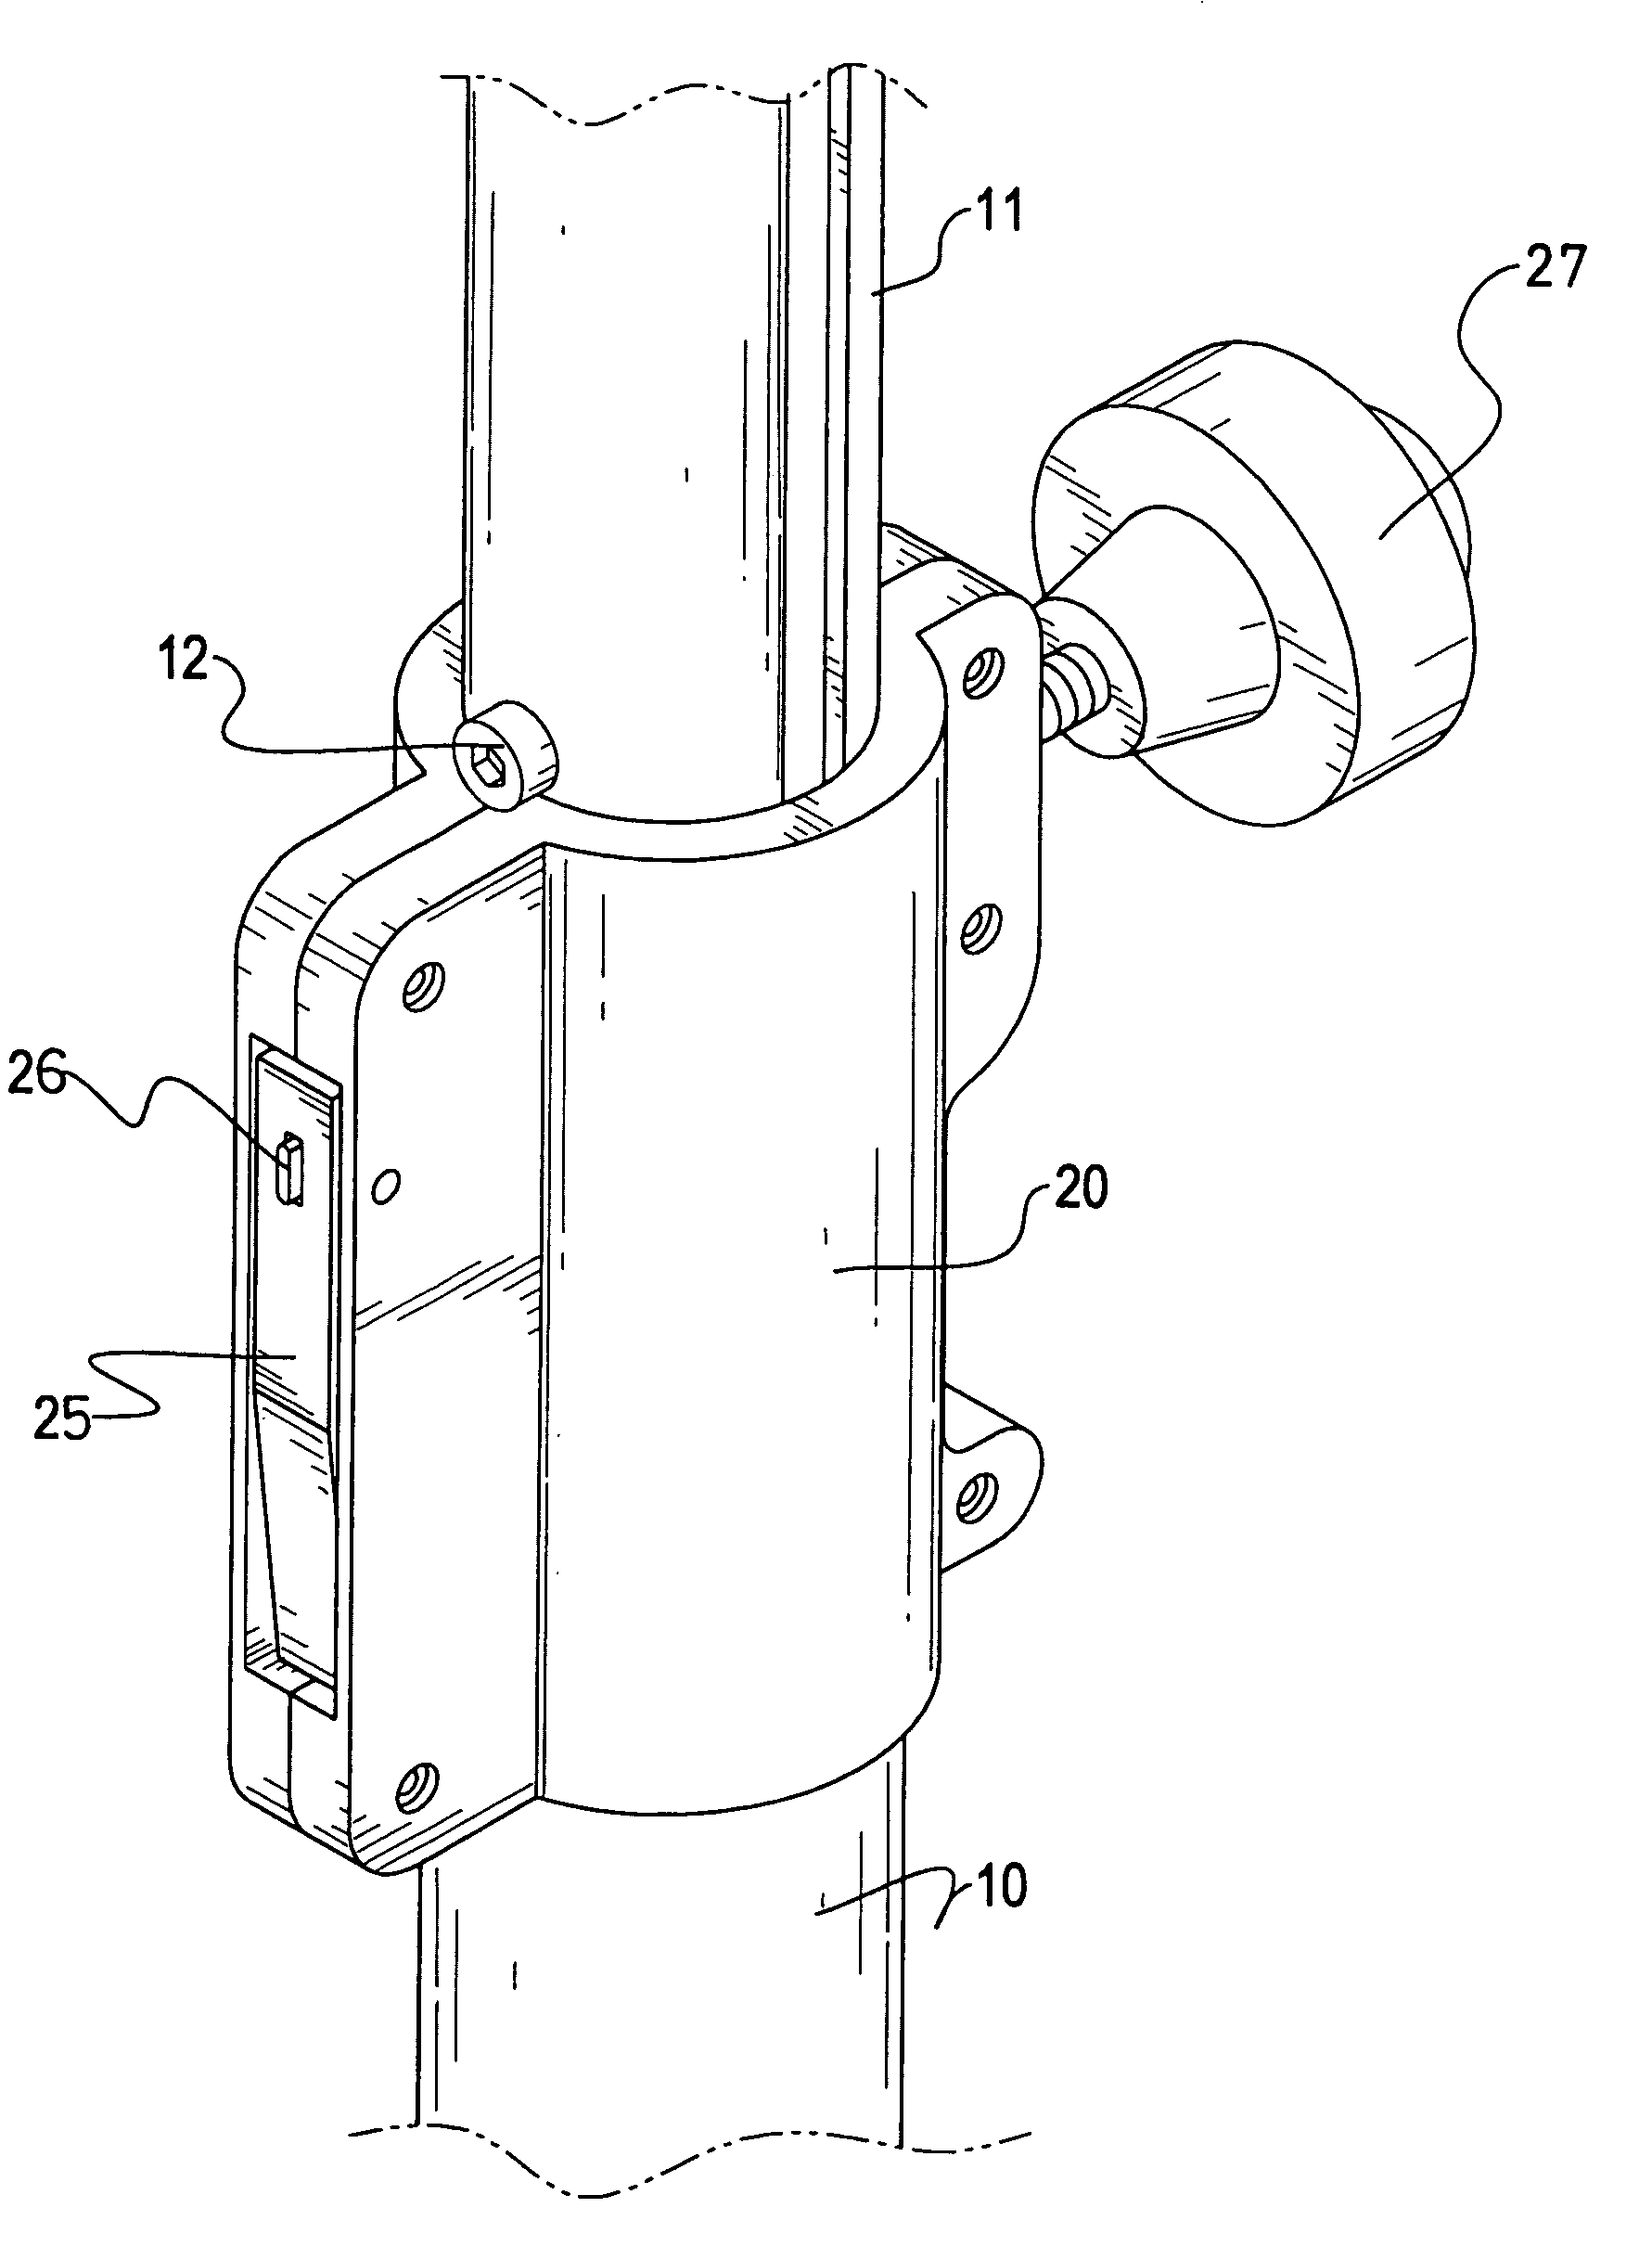 Locking device to secure a telescopic tube assembly